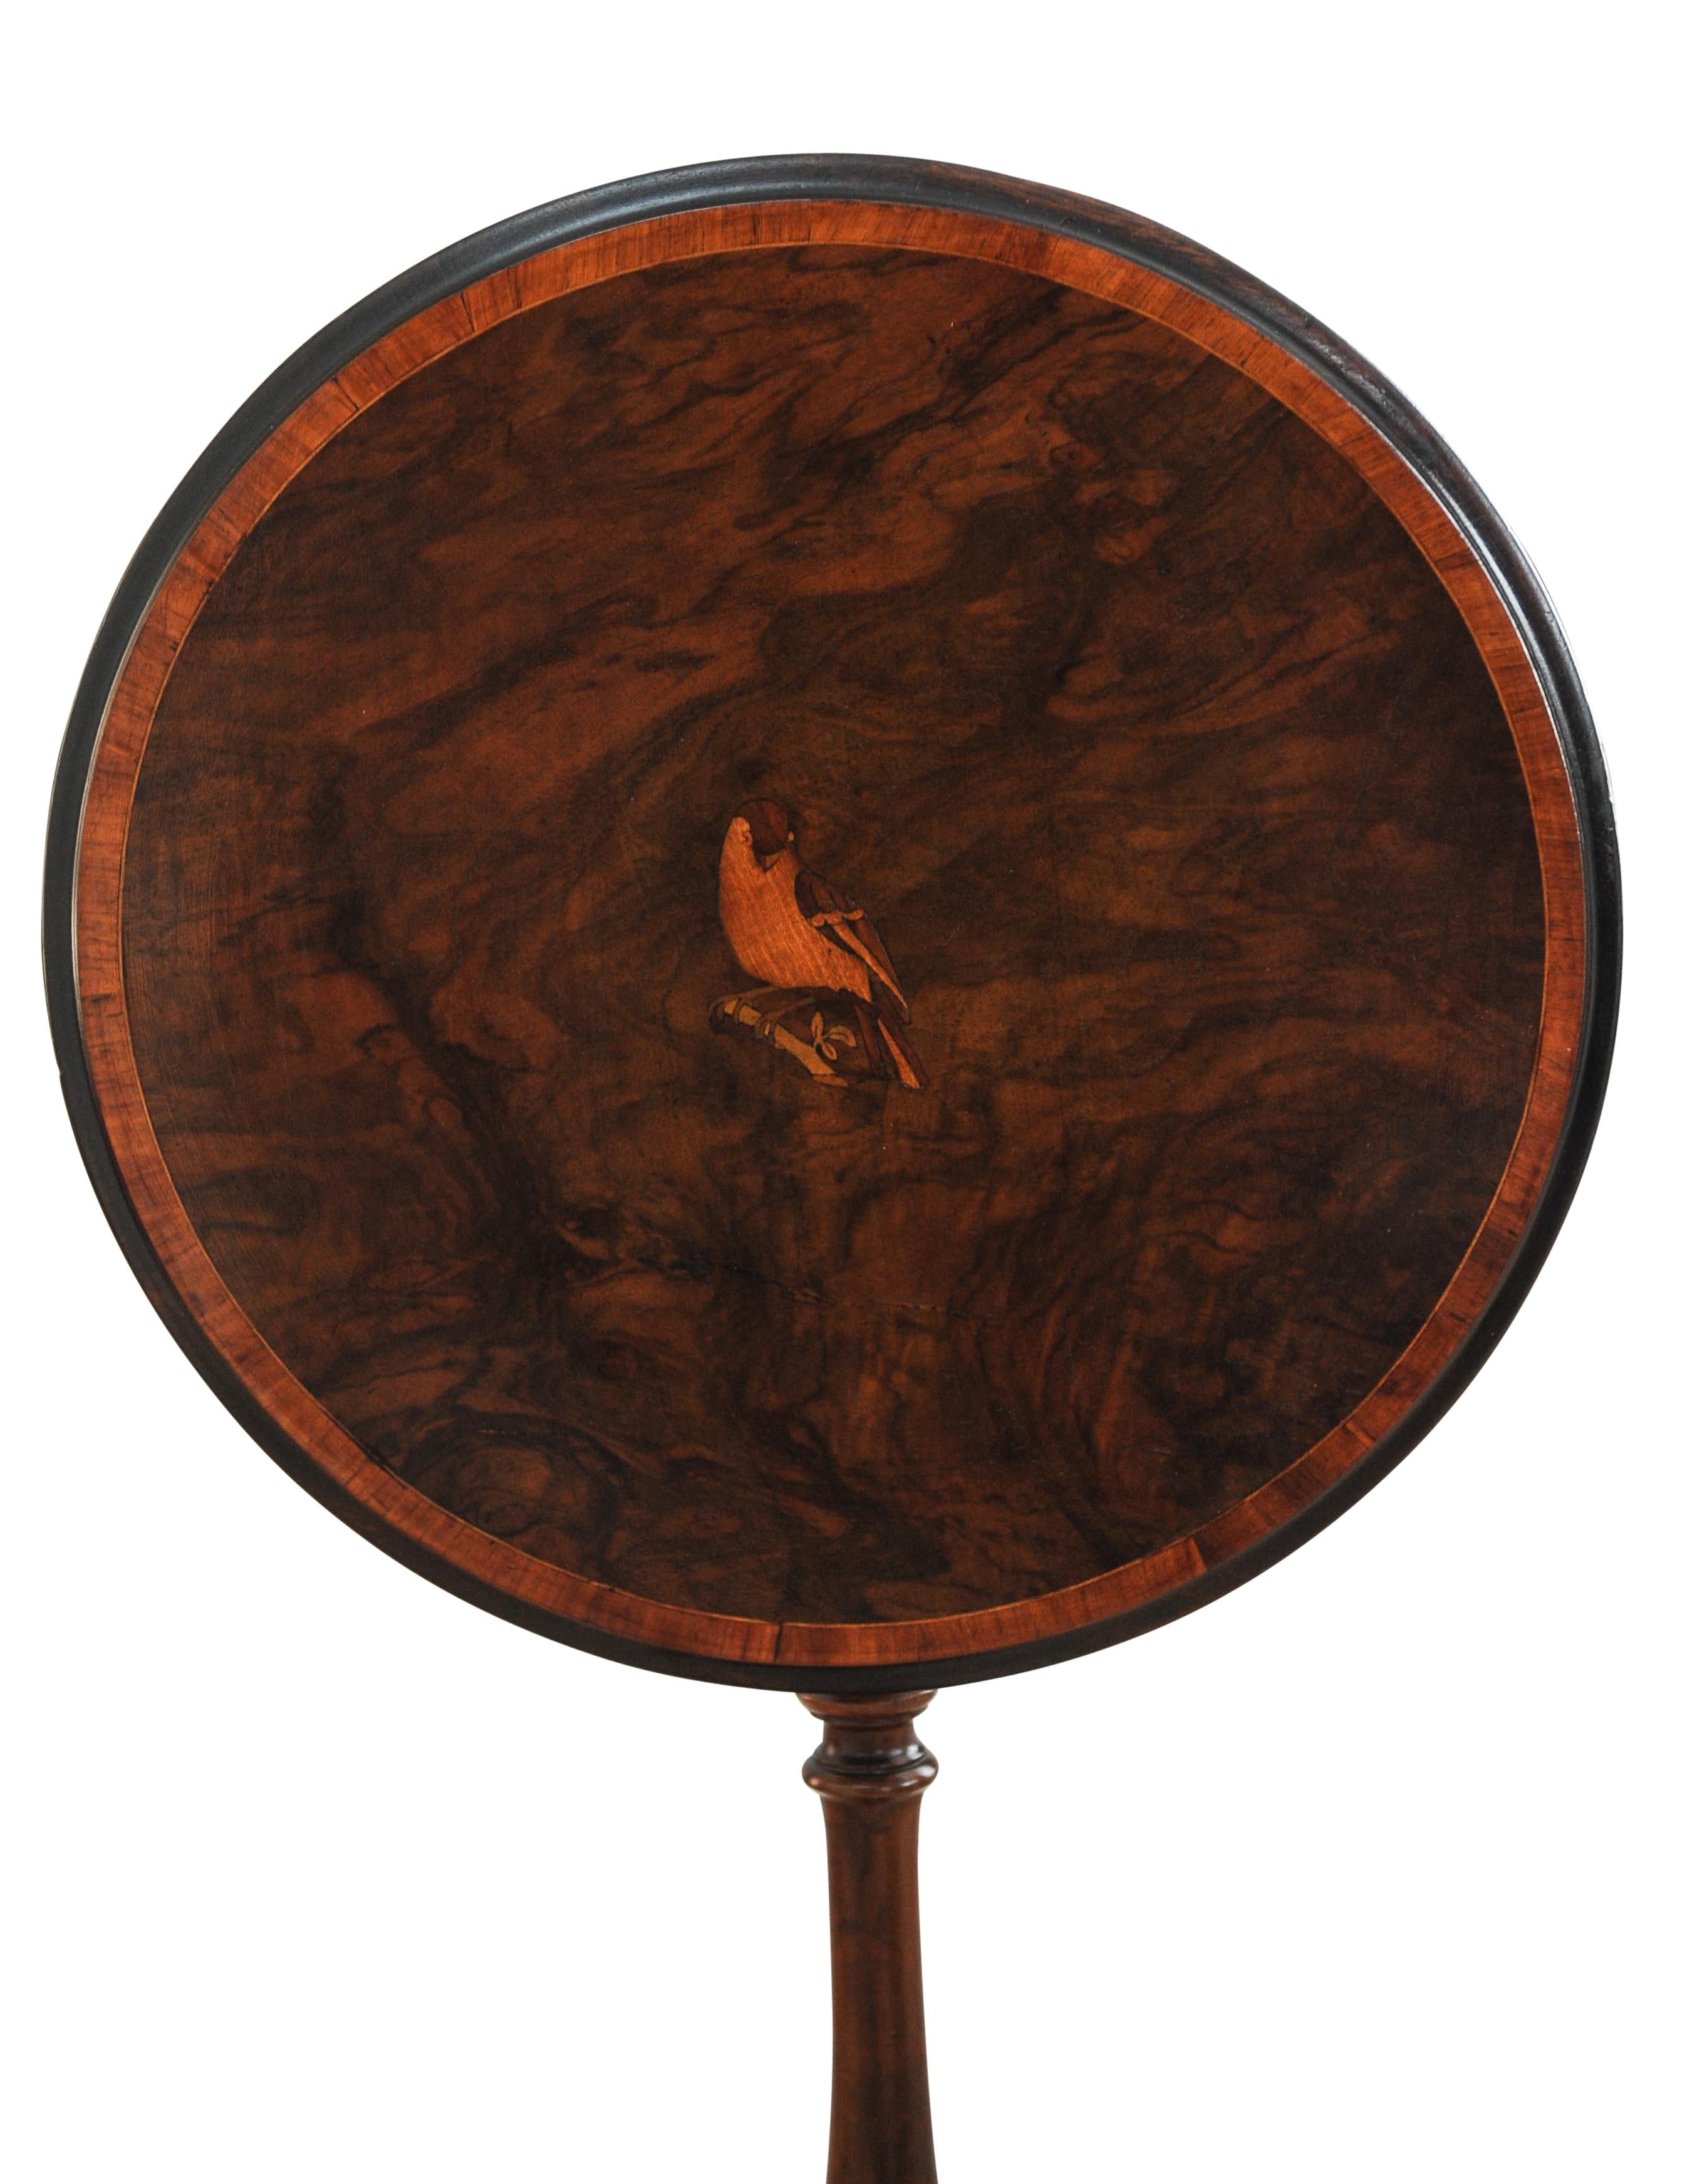 19th Century French Walnut Tilt Top Wine Table With A Central Inlaid Bird Motif  For Sale 3